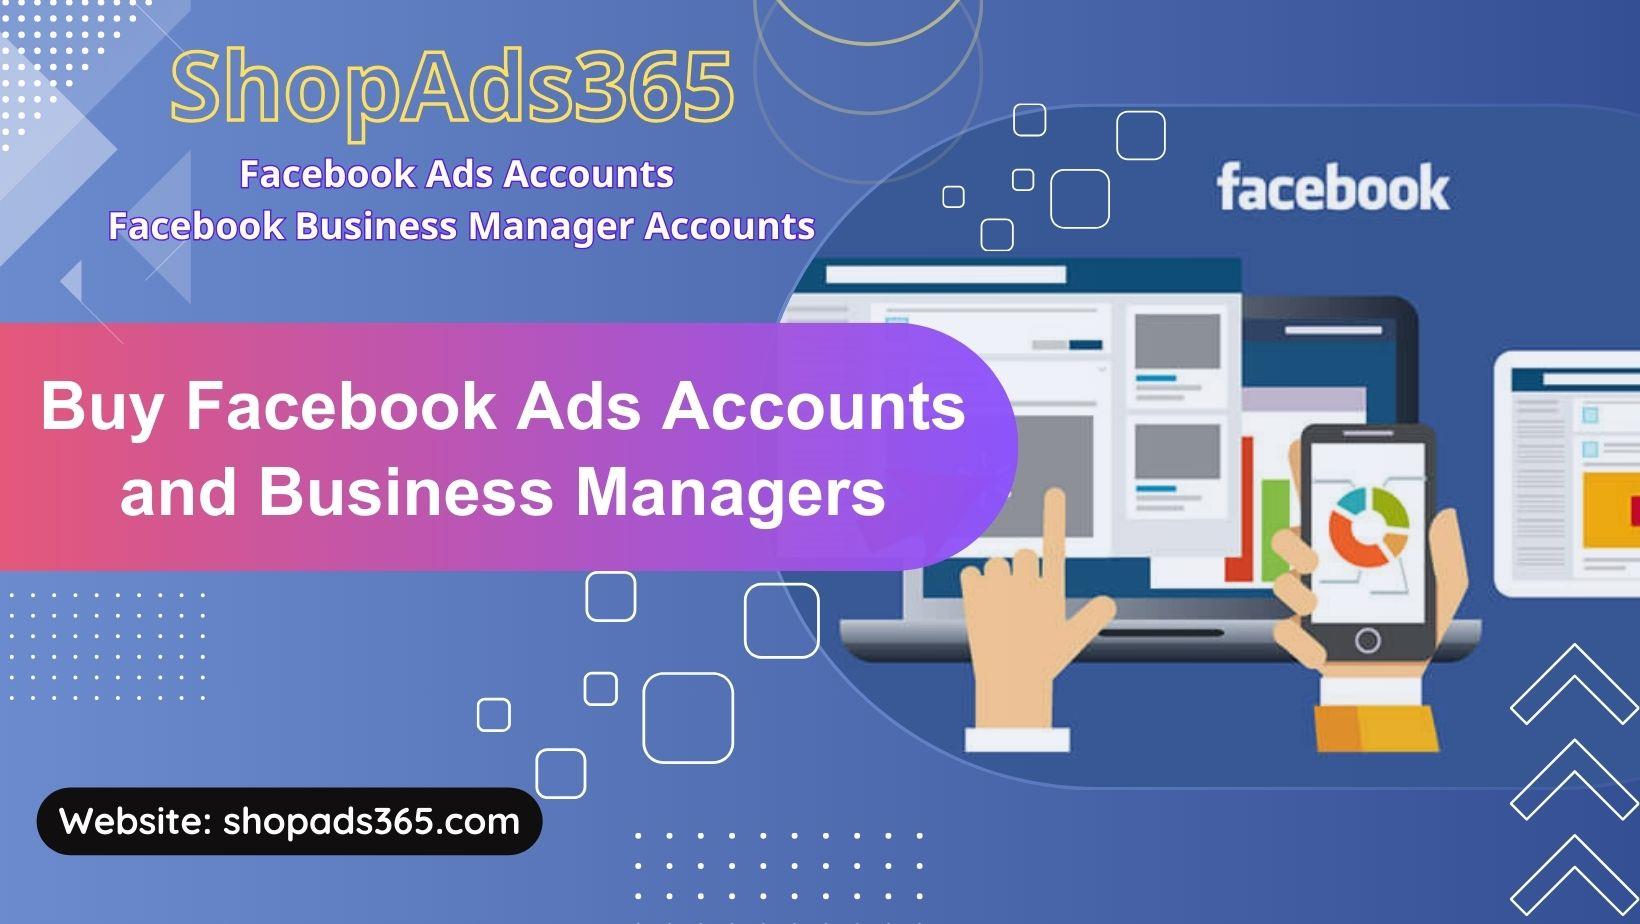 Buy Facebook Ads Accounts and Business Managers: Risks, Legal Considerations, and Ethical Implications